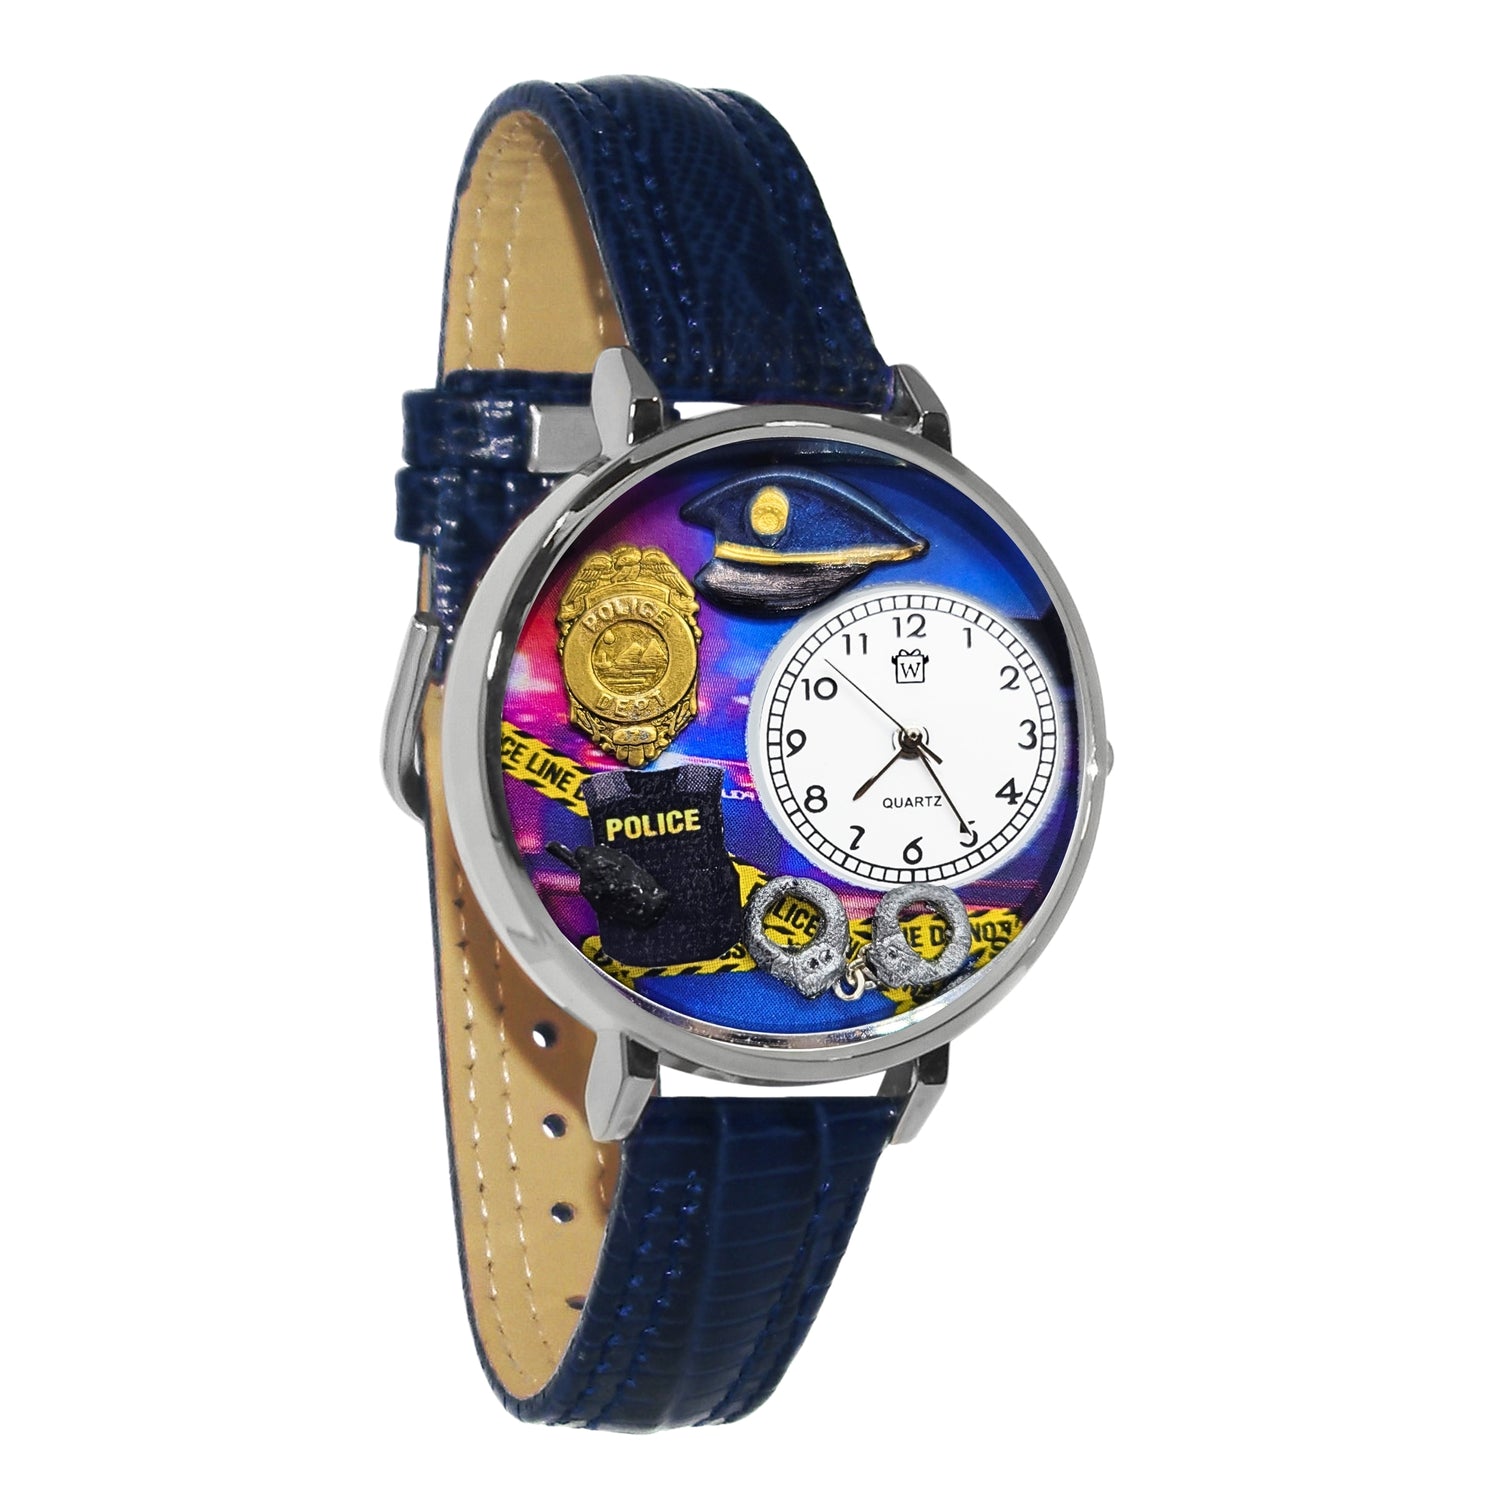 Whimsical Gifts | Policeman 3D Watch Large Style | Handmade in USA | Professions Themed | First Responders | Novelty Unique Fun Miniatures Gift | Silver Finish Navy Blue Leather Watch Band